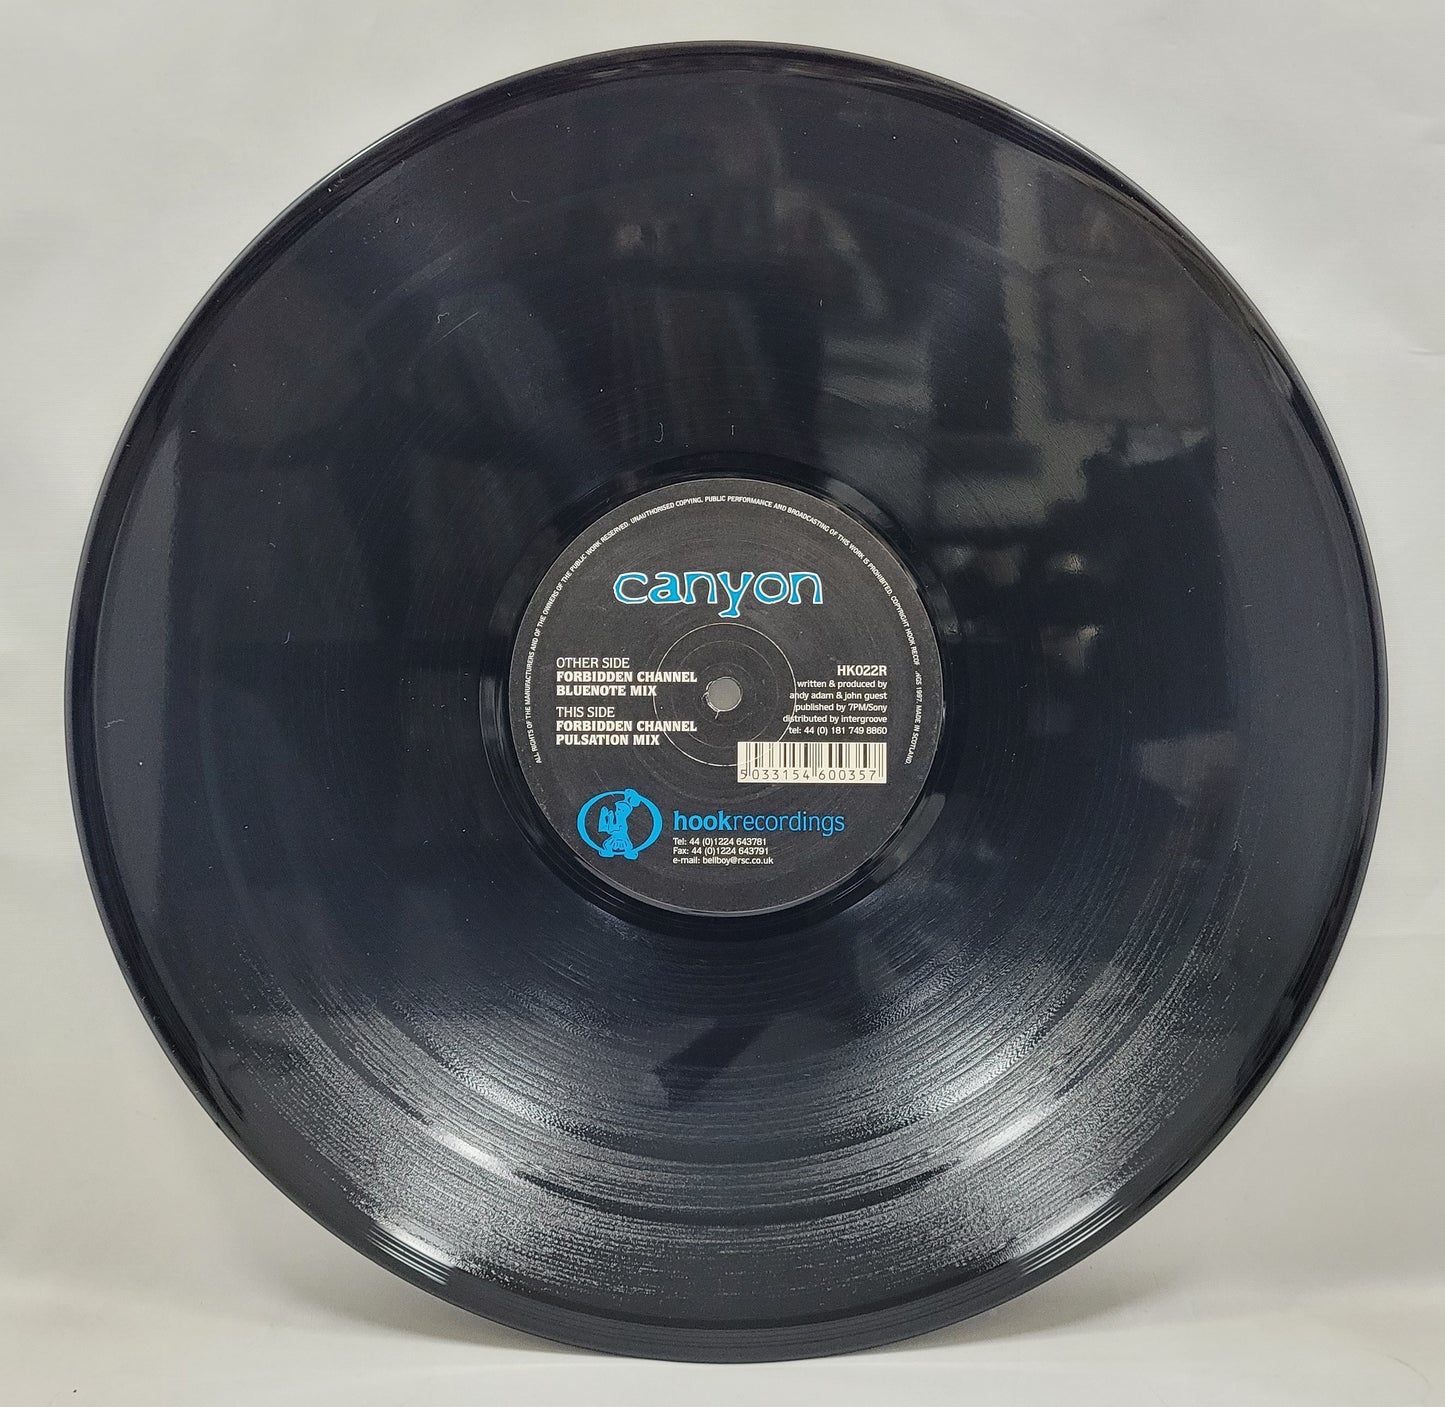 Canyon - Forbidden Channel [1997 UK] [Used Vinyl Record 12" Single]